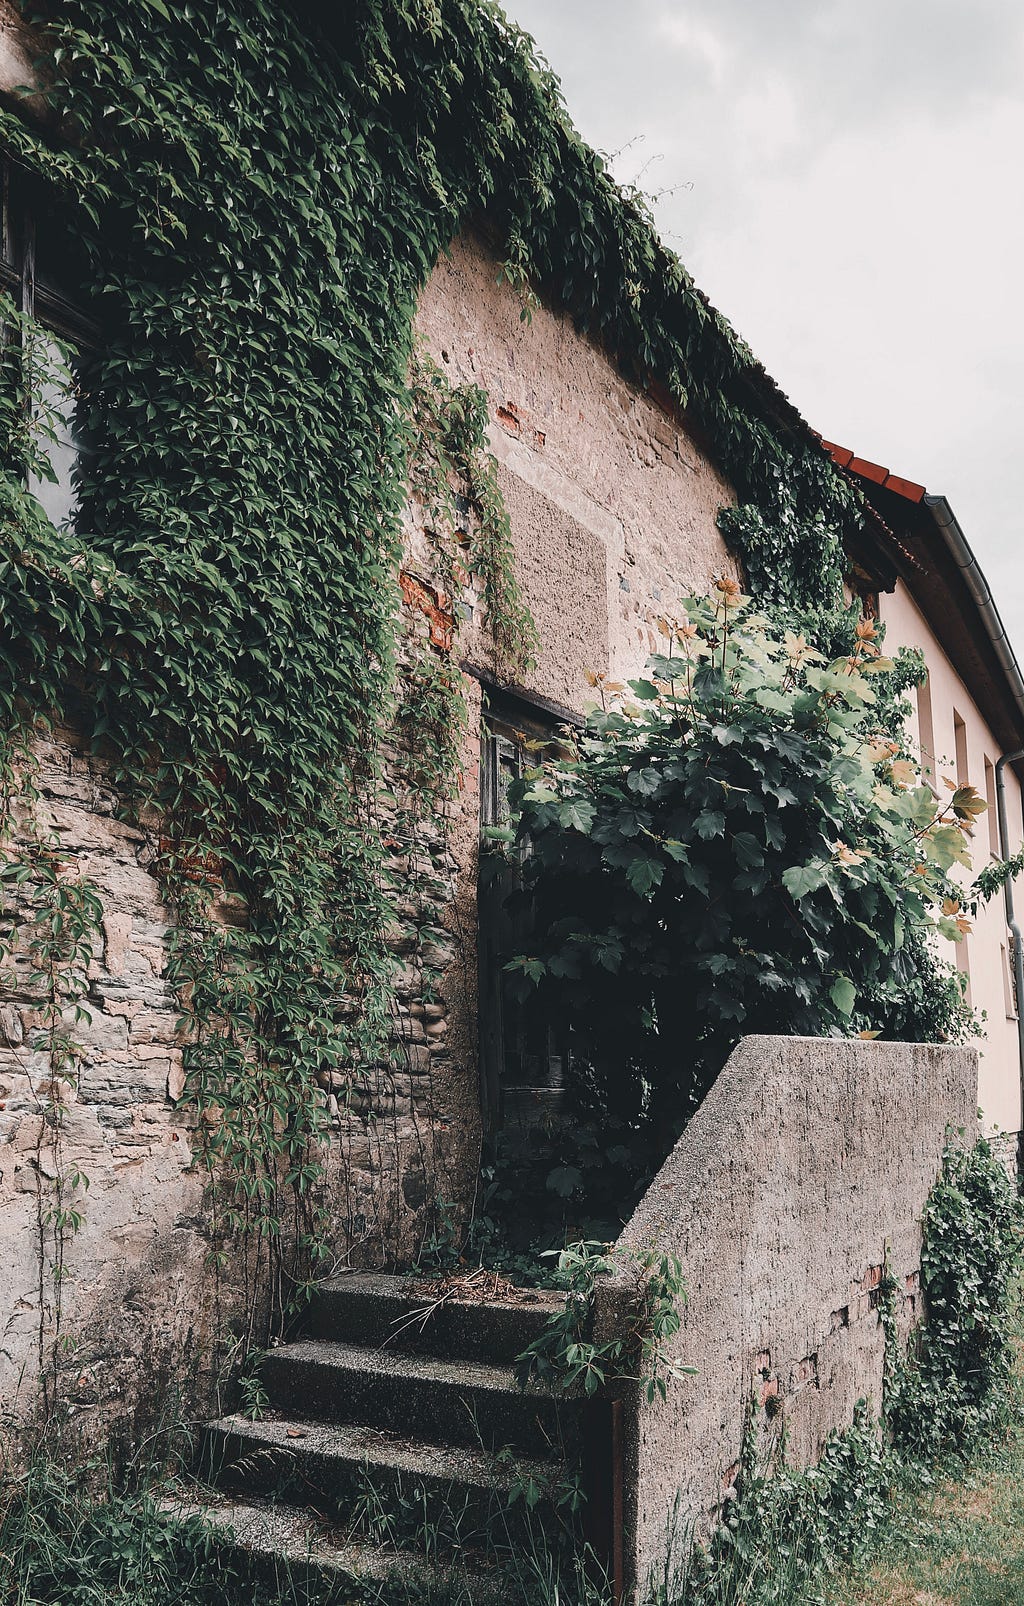 this picture depicts Ivy growing on the walls of a house, to represent how plants will grow wherever there are resources.